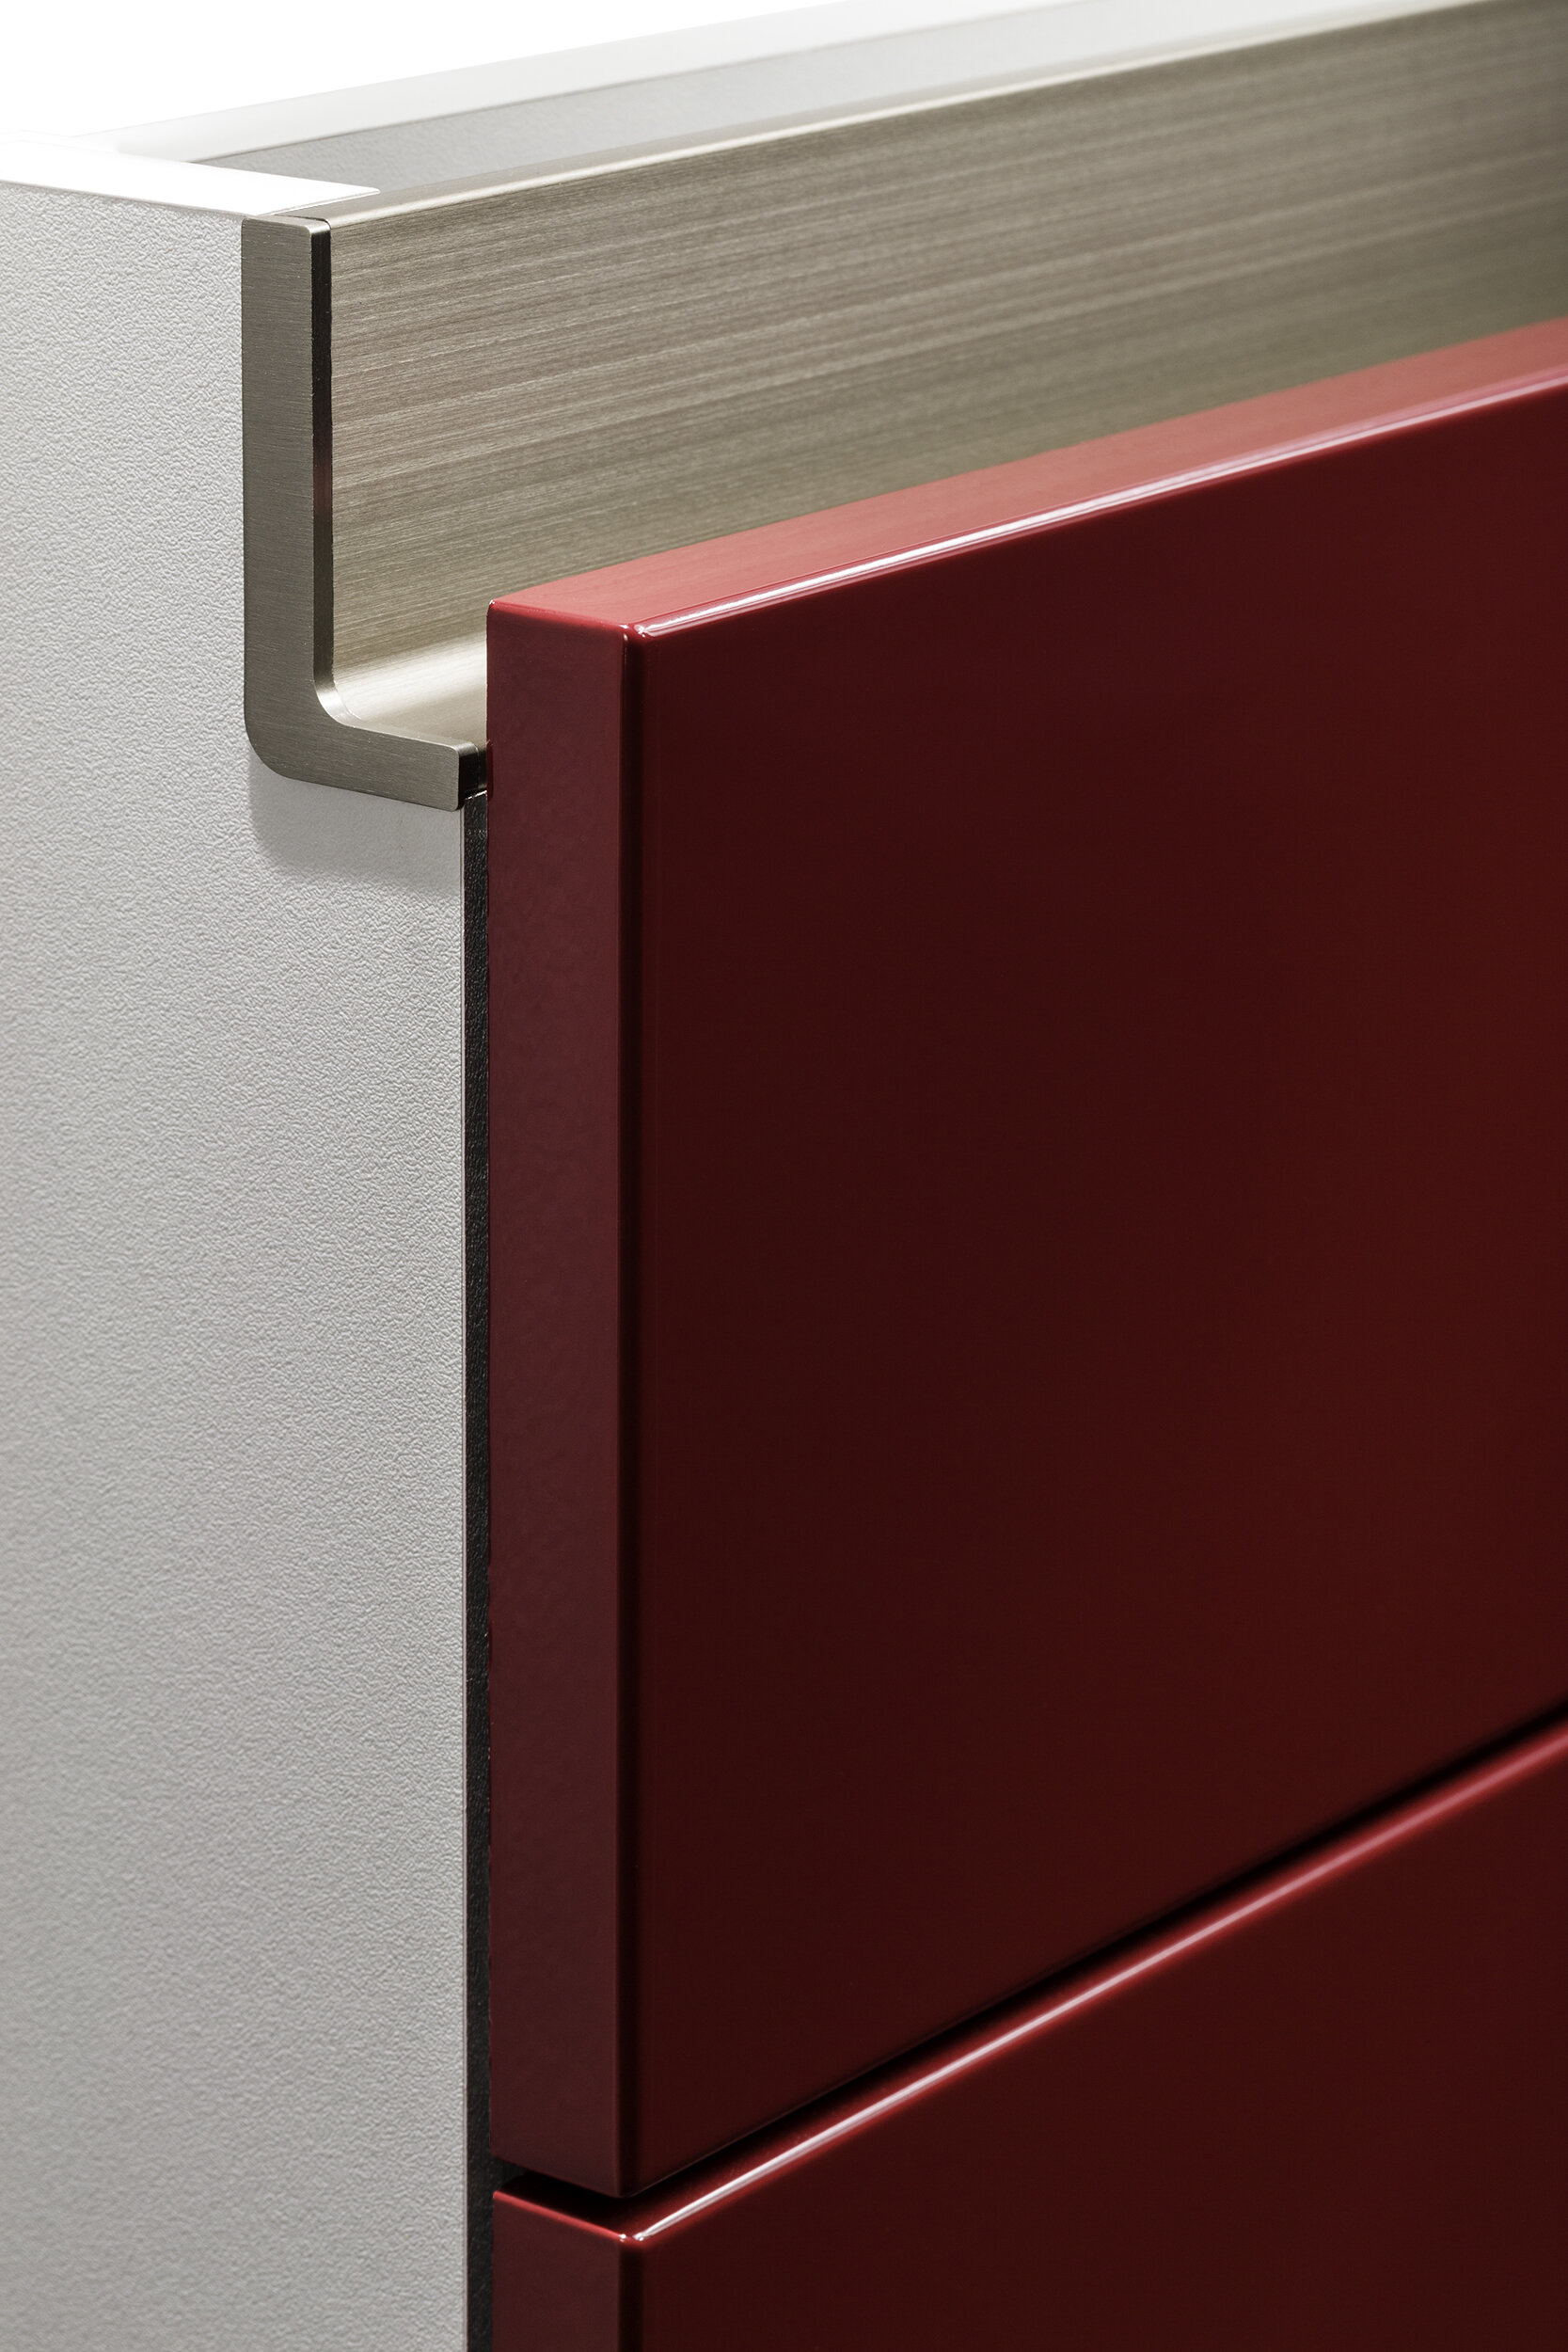 Spectra Integrated Channel Handle with Stella High Gloss Door in Port